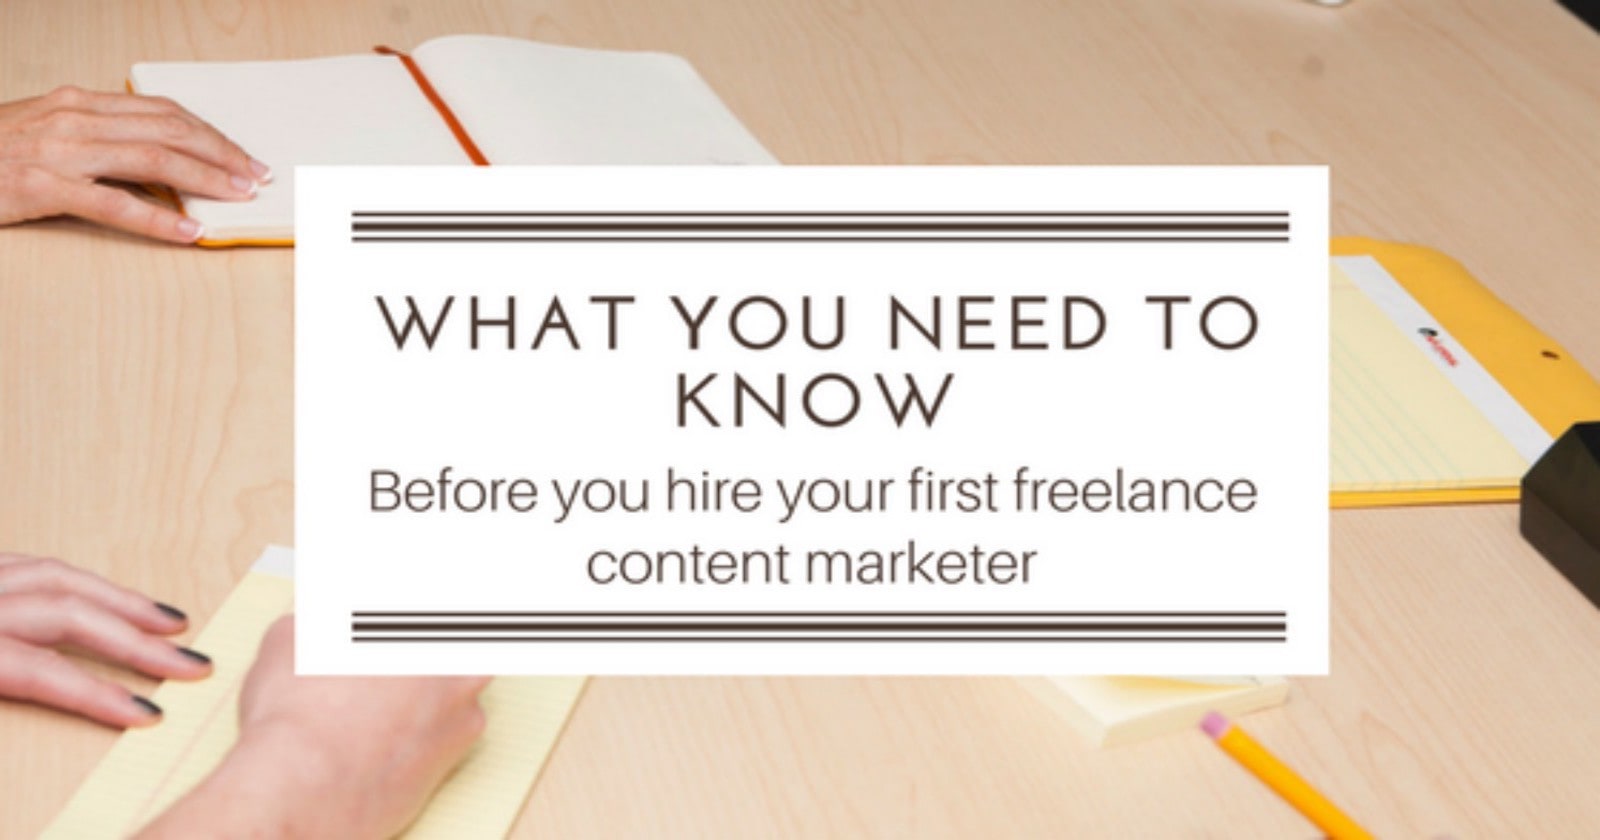 content marketing freelance what need to know